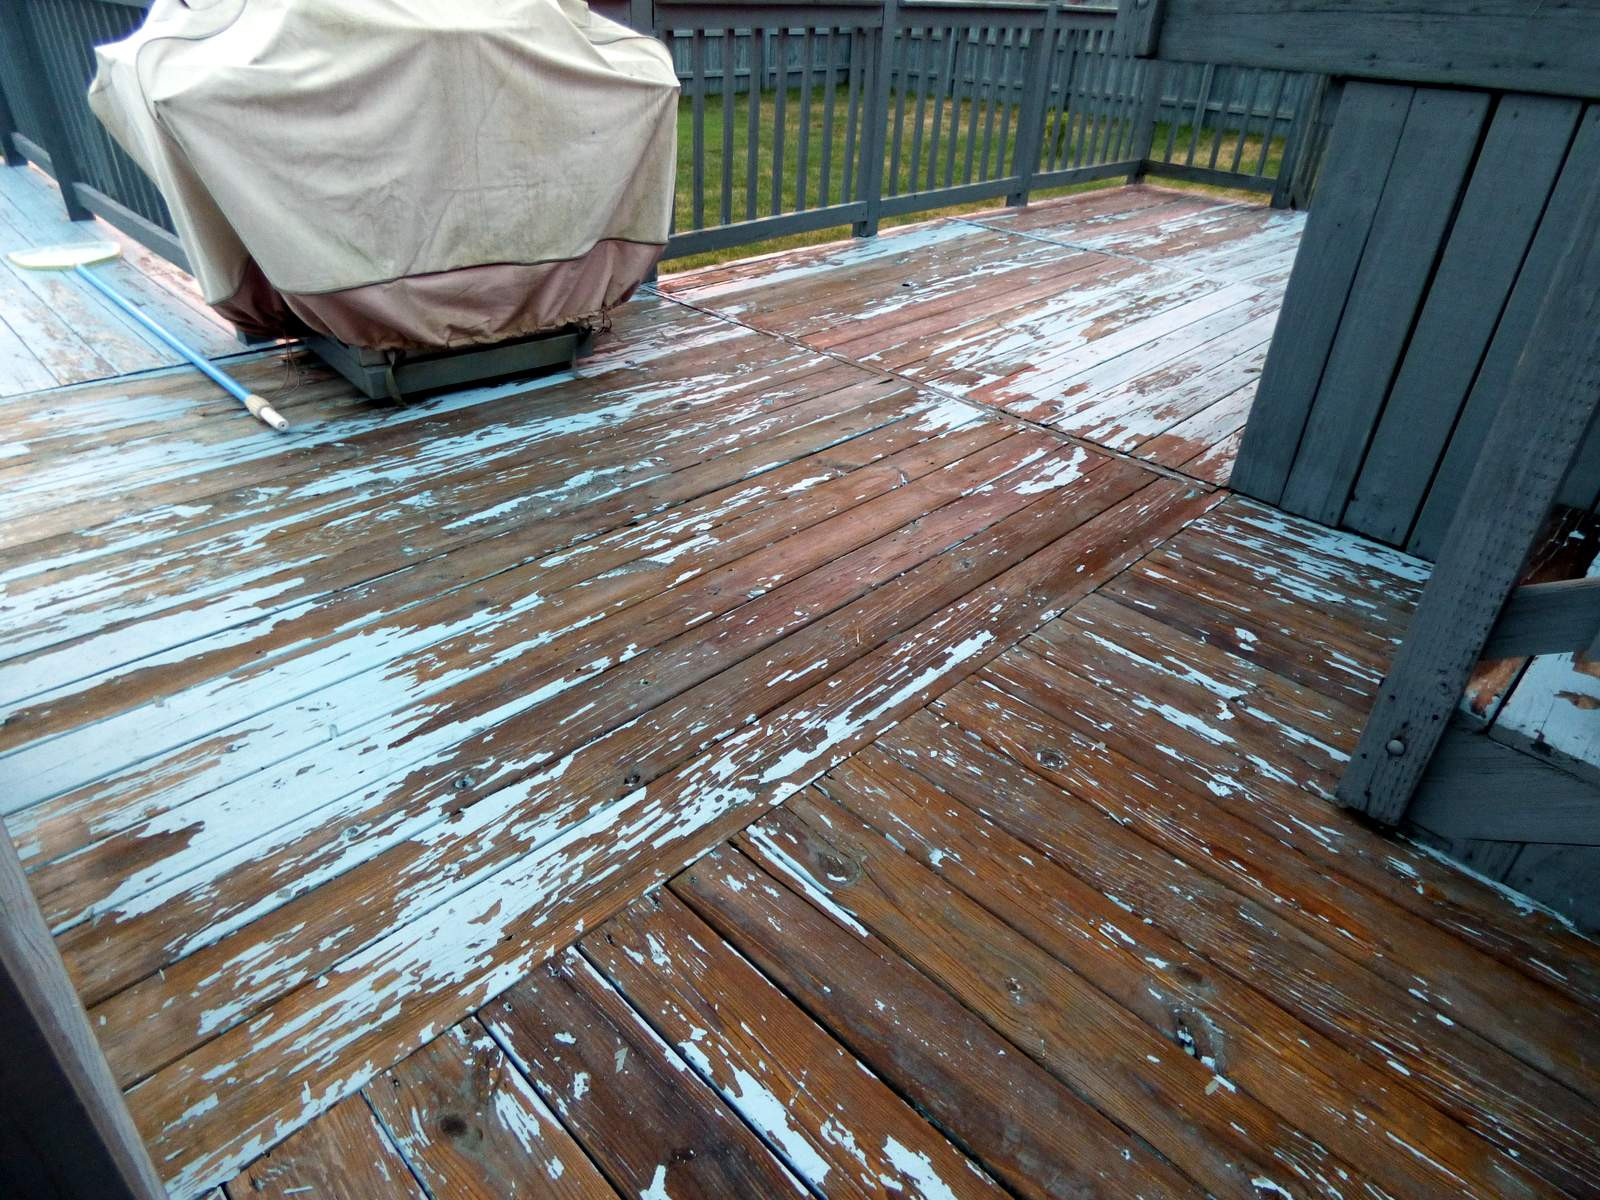 cost to refinish hardwood floors michigan of class action lawsuit against olympic rescue it best deck stain for a lot of the peeling paint but as you can see we have more to go i have a contractor coming over today this is just a small portion of our decking